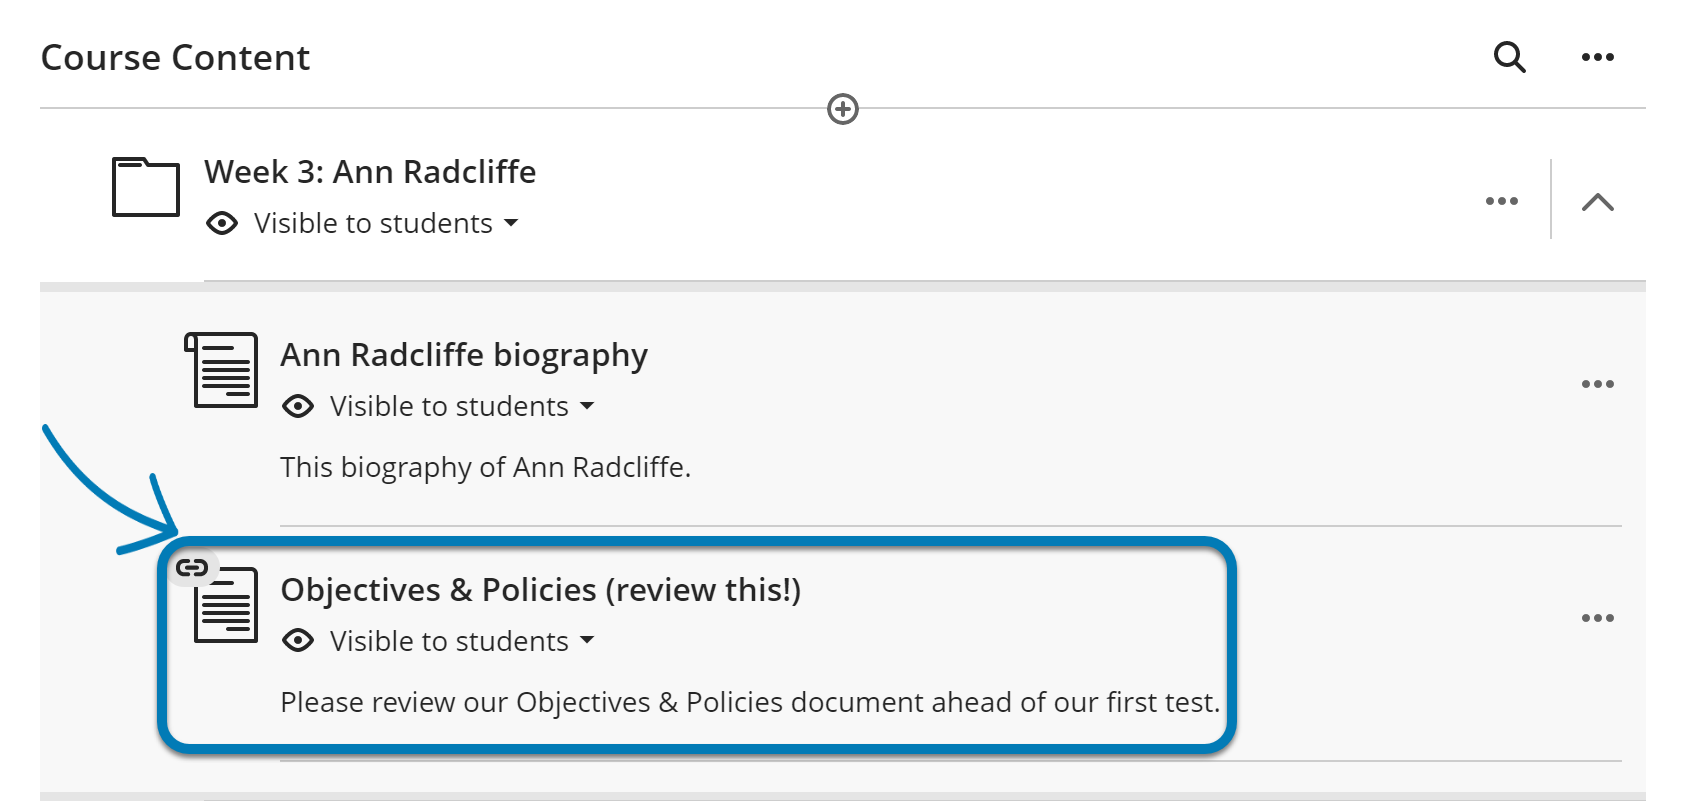 Detail of Course Content page with blue box and blue callout arrow highlighting Course Link